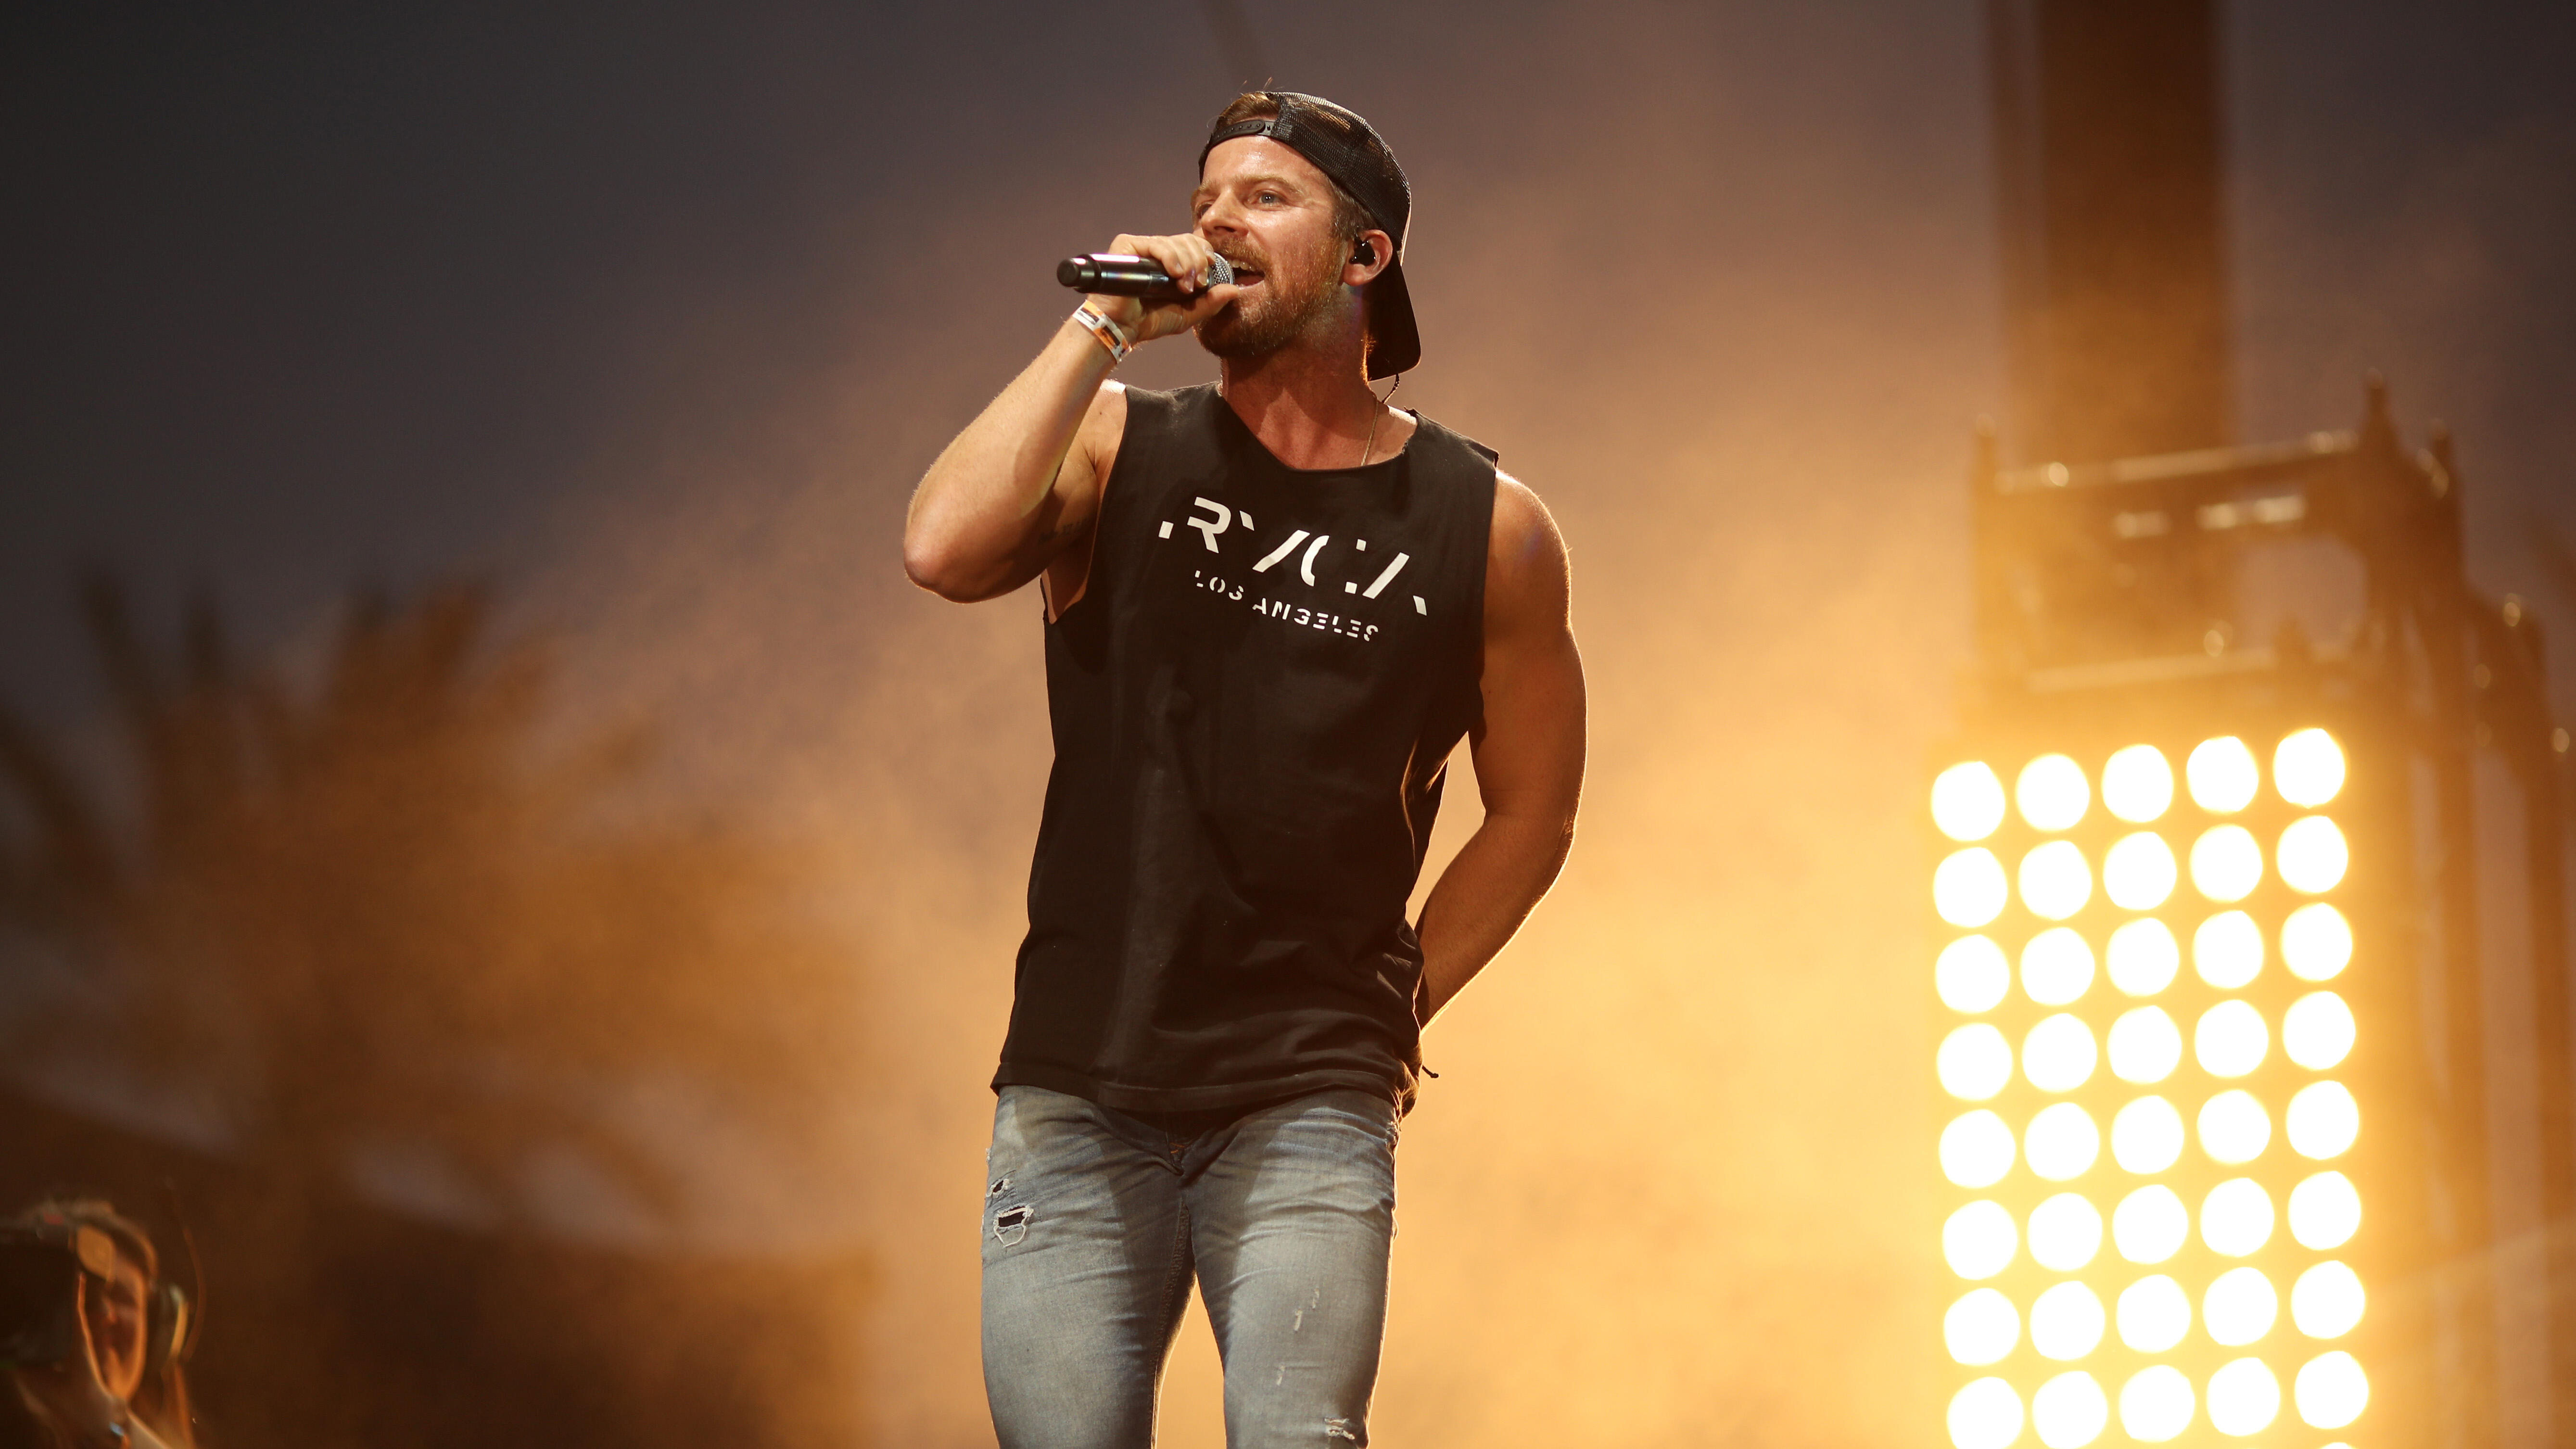 INDIO, CA - APRIL 29:  Musician Kip Moore performs on the Toyota Mane Stage during day 2 of 2017 Stagecoach California's Country Music Festival at the Empire Polo Club on April 29, 2017 in Indio, California.  (Photo by Christopher Polk/Getty Images for St